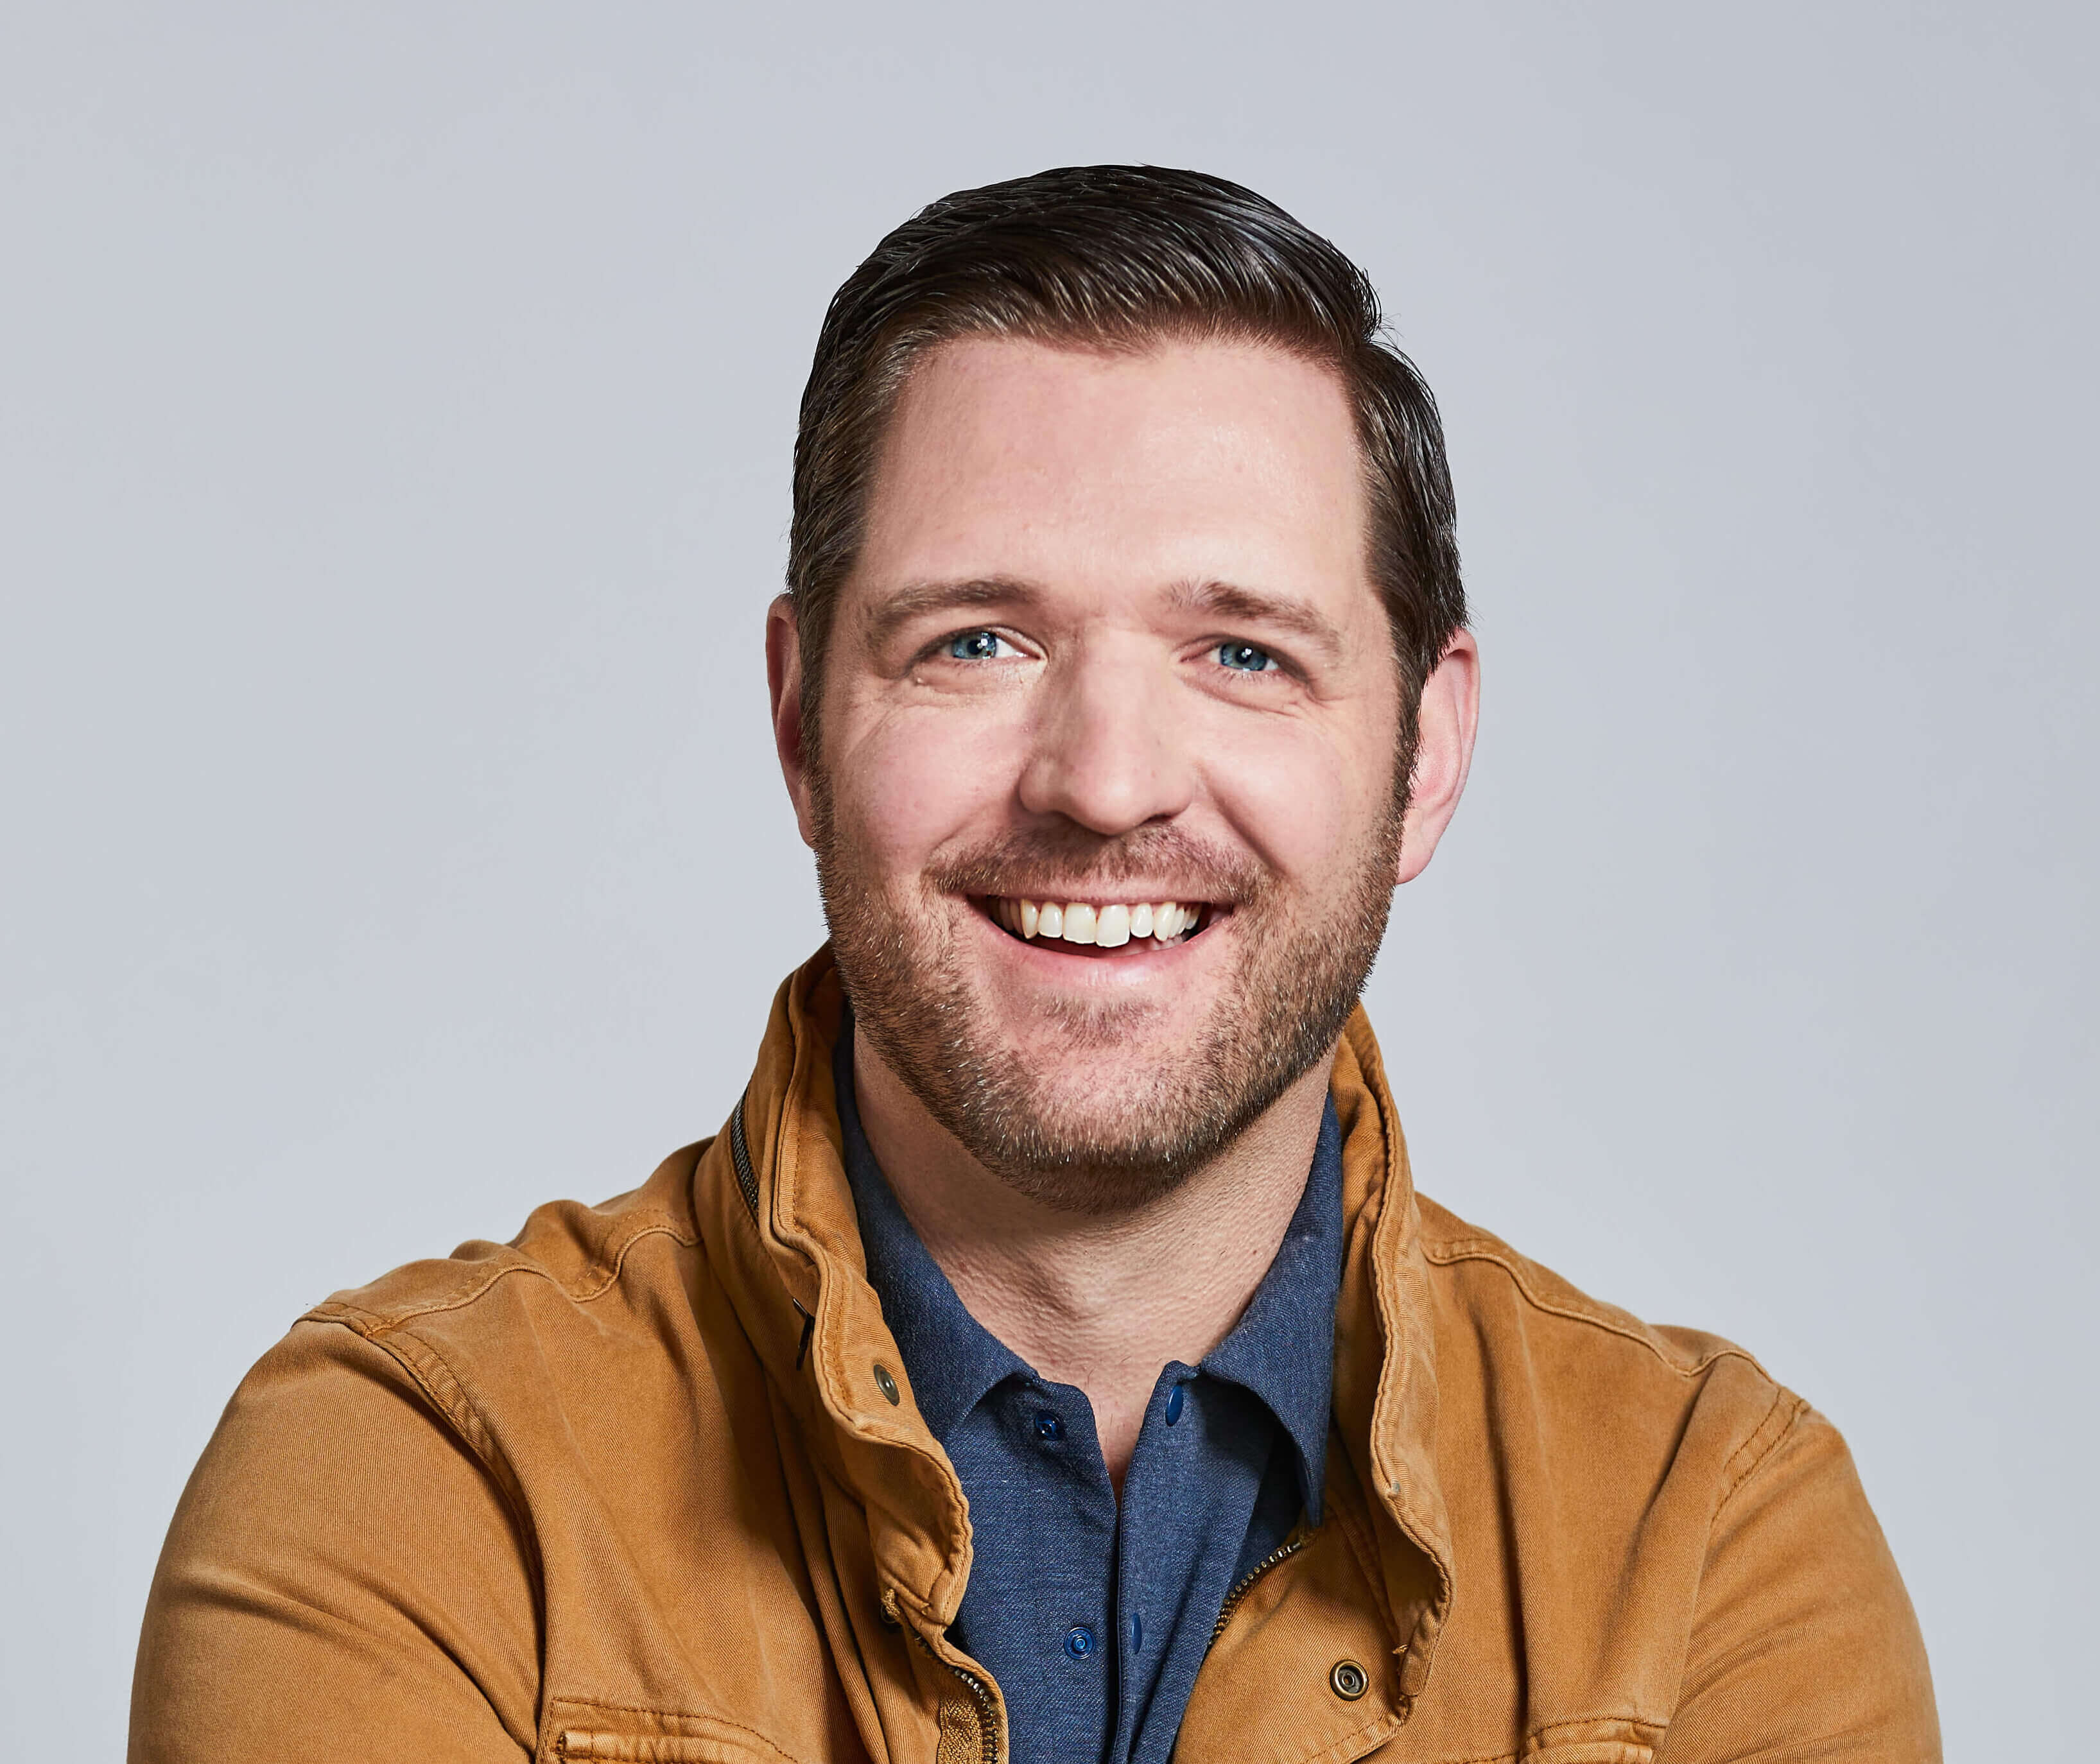 Headshot of smiling man with beard. Wearing a camel colored utility jacket and blue button up collard shirt underneath.